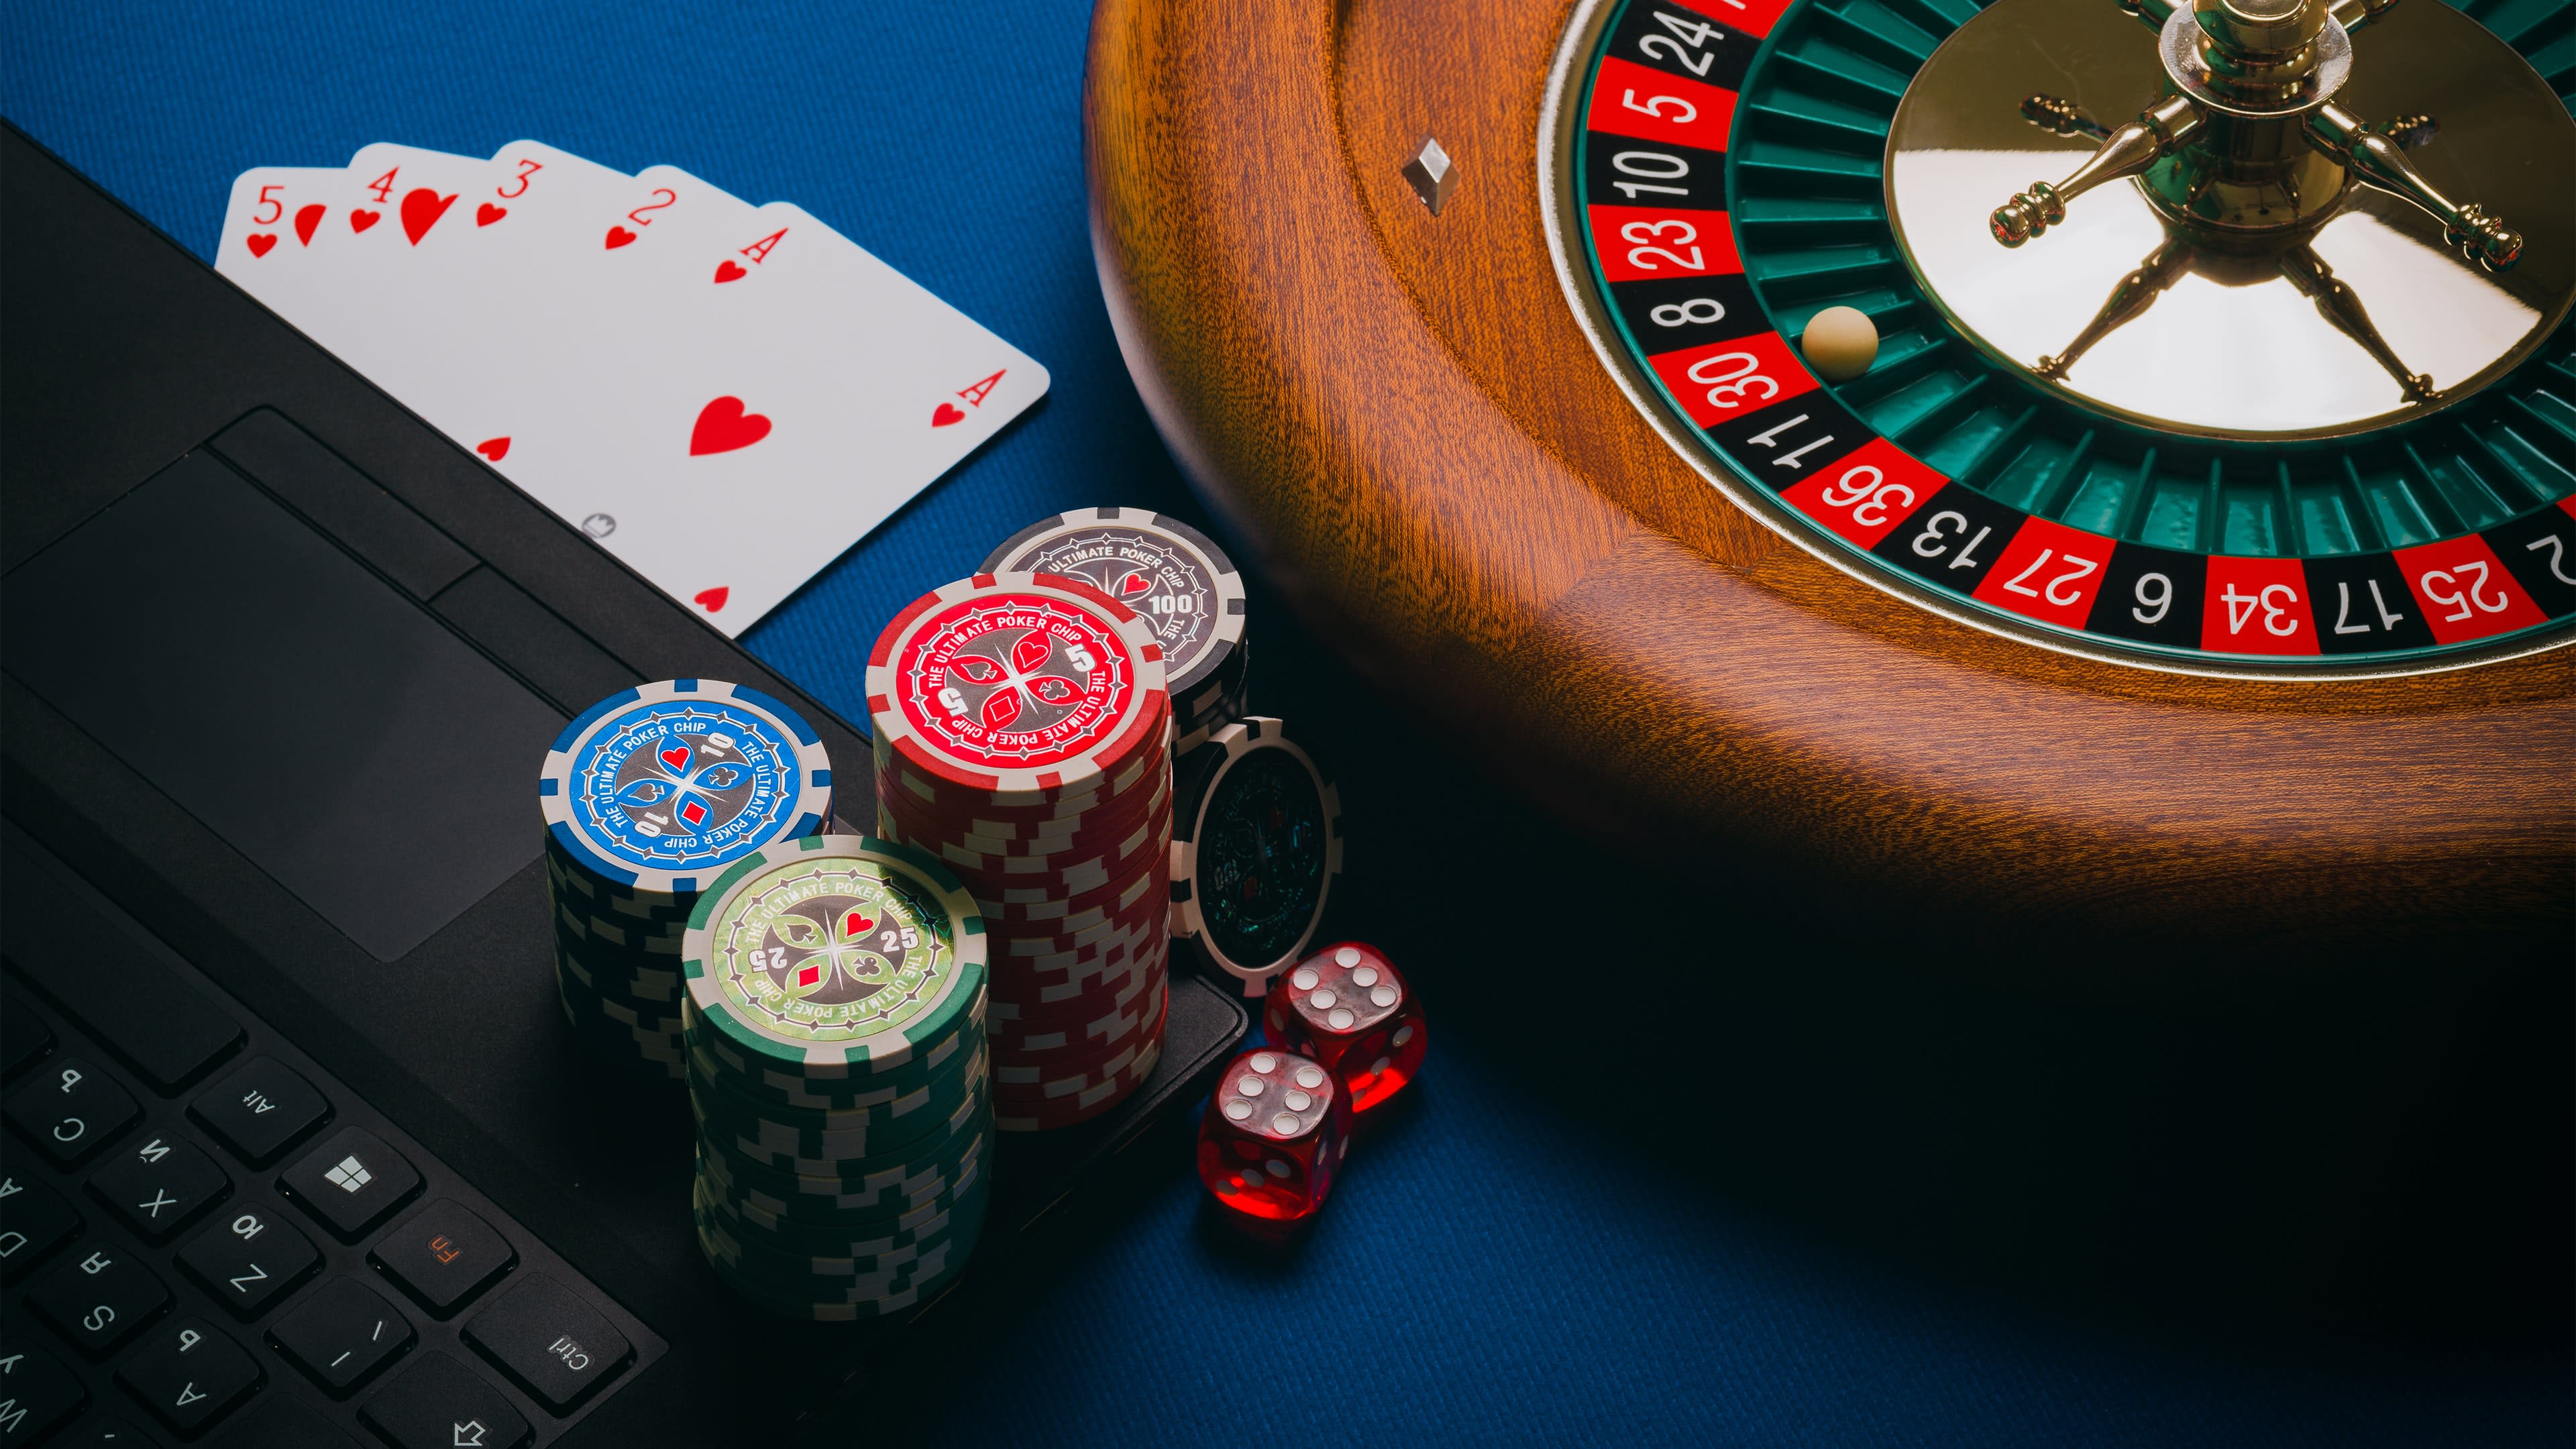 The proposed changes to Singapore's gambling laws will take account of the increased popularity of online gambling.